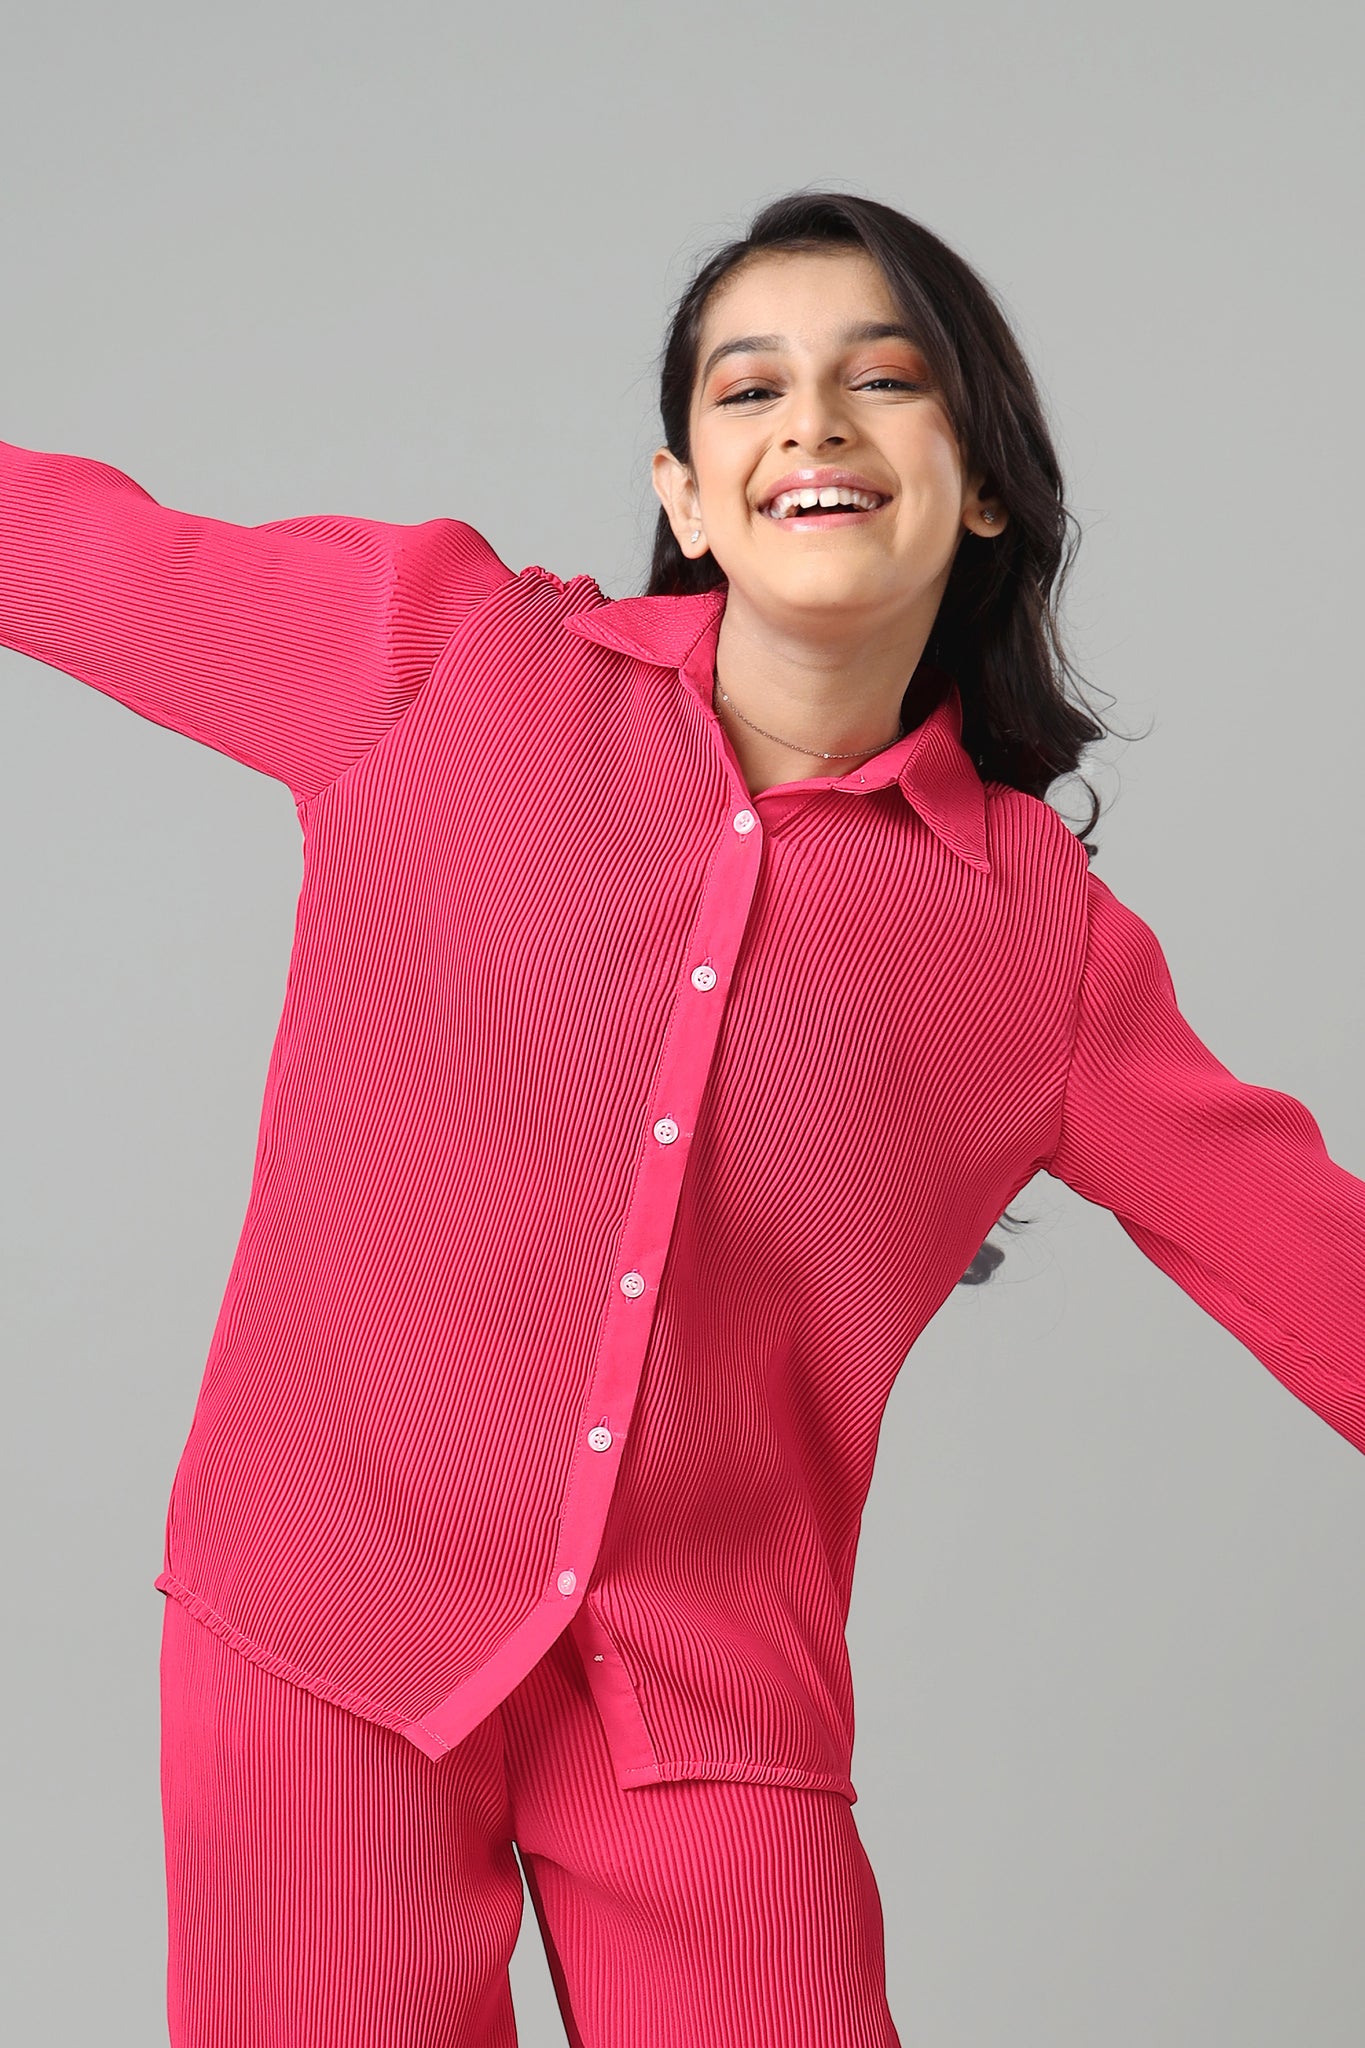 Exclusive Hot Pink Pleated Shirt For Girls